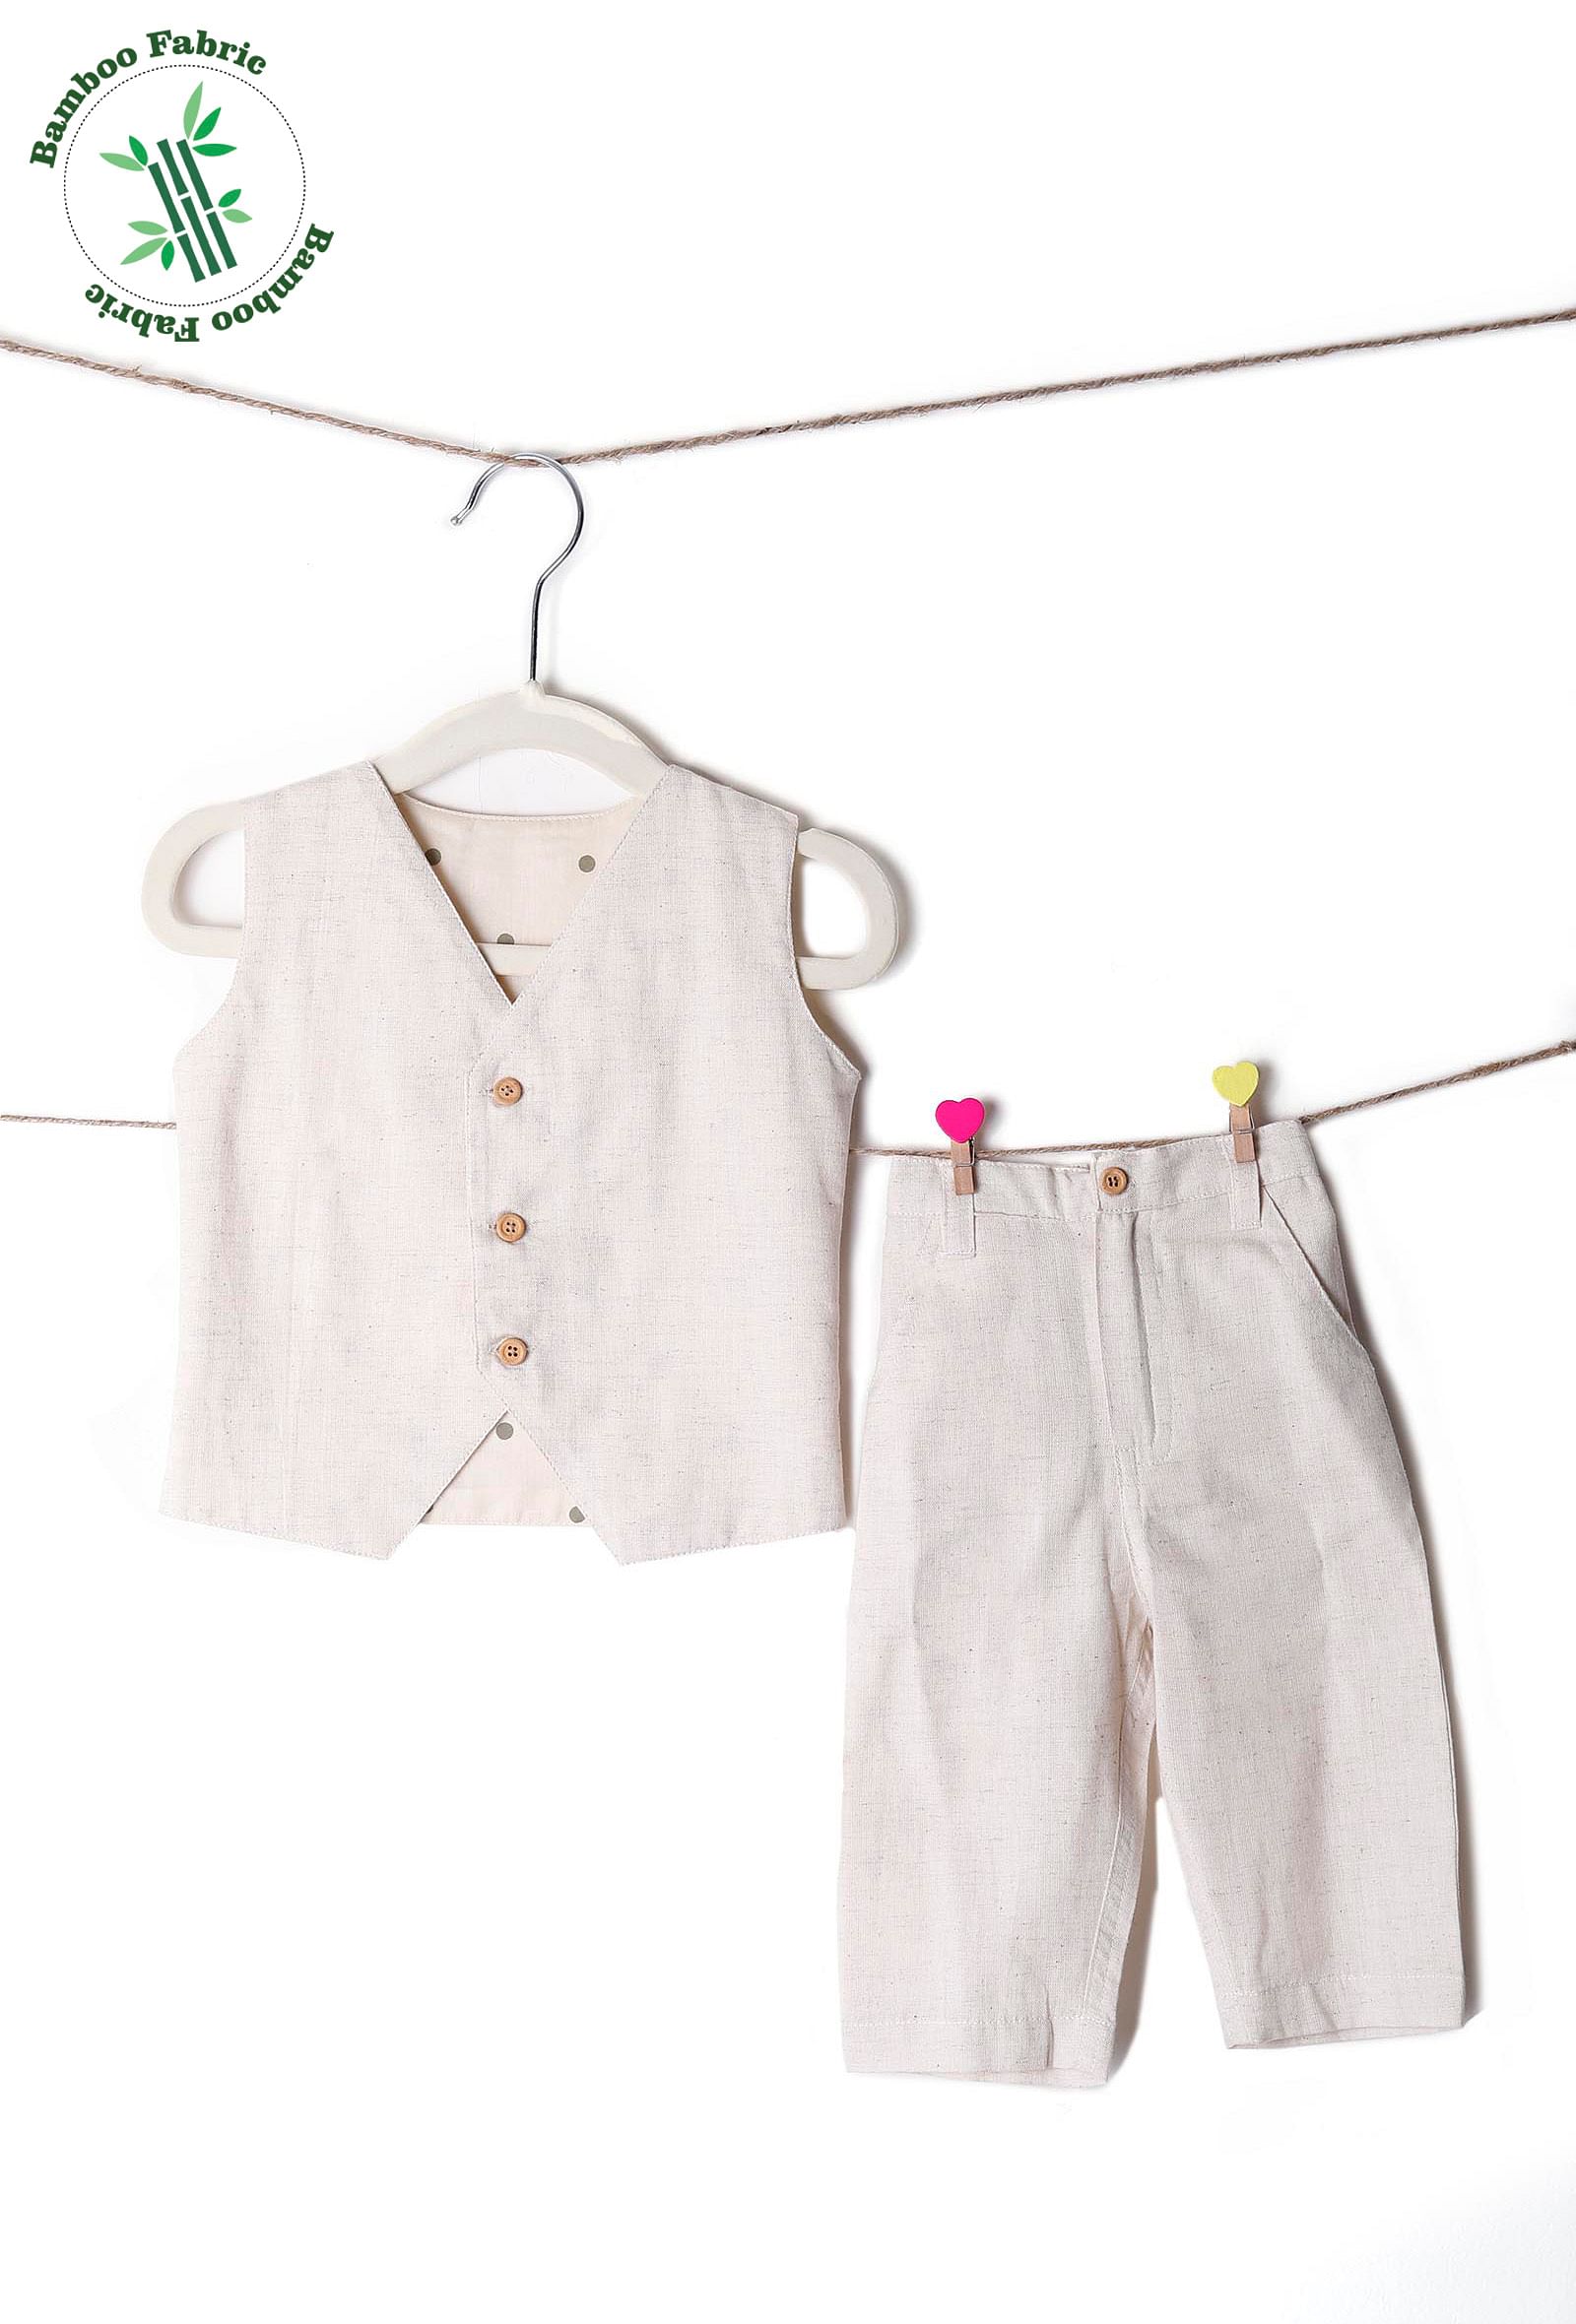 Set of 2: Off White Cotton Waist Coat and Pants